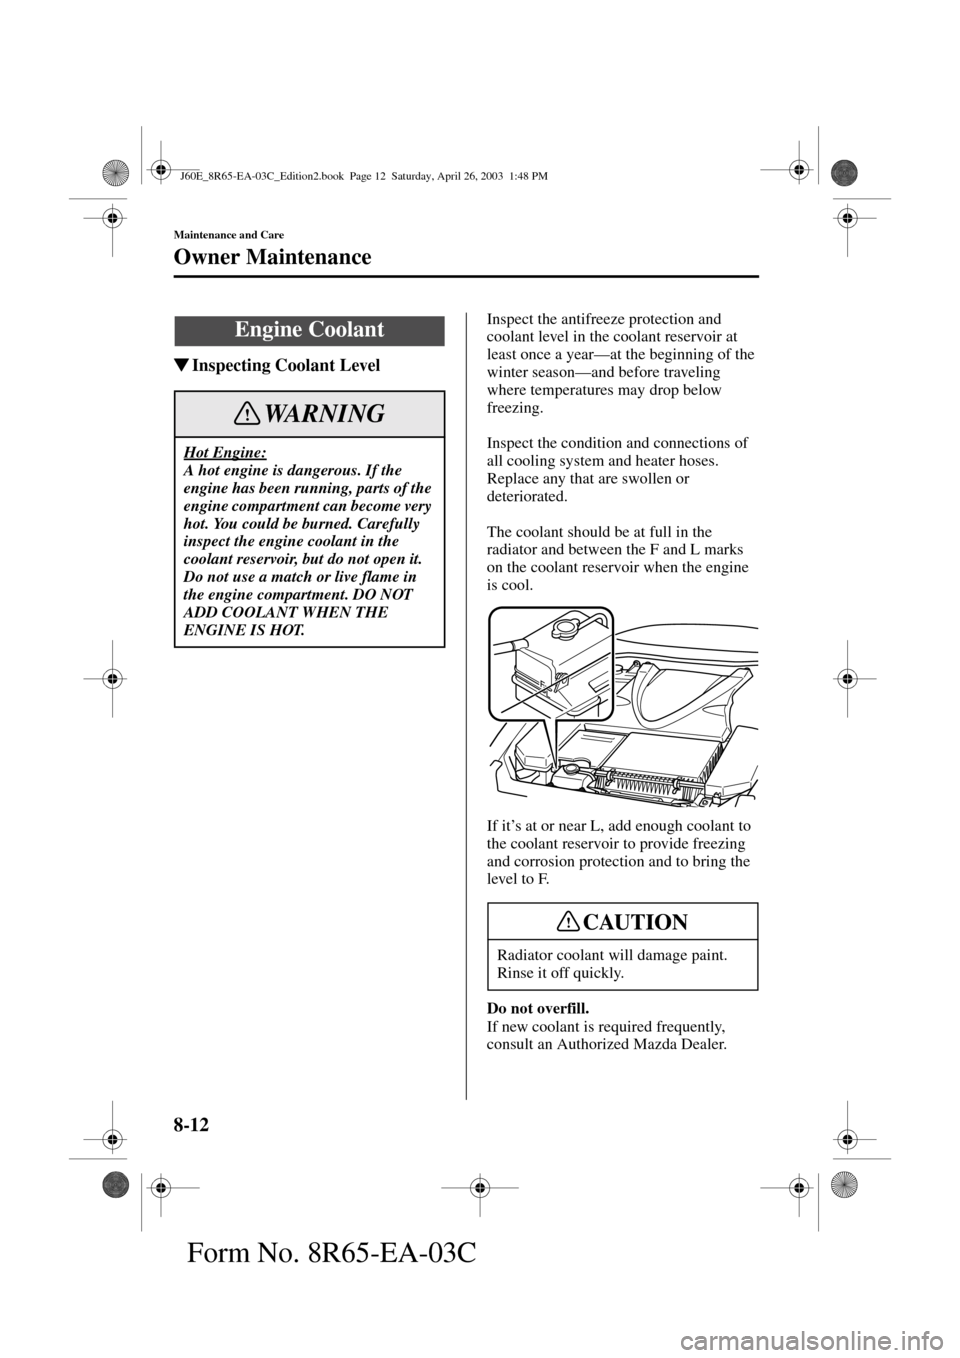 MAZDA MODEL RX 8 2004  Owners Manual (in English) 8-12
Maintenance and Care
Owner Maintenance
Form No. 8R65-EA-03C
Inspecting Coolant Level
Inspect the antifreeze protection and 
coolant level in the coolant reservoir at 
least once a year—at the 